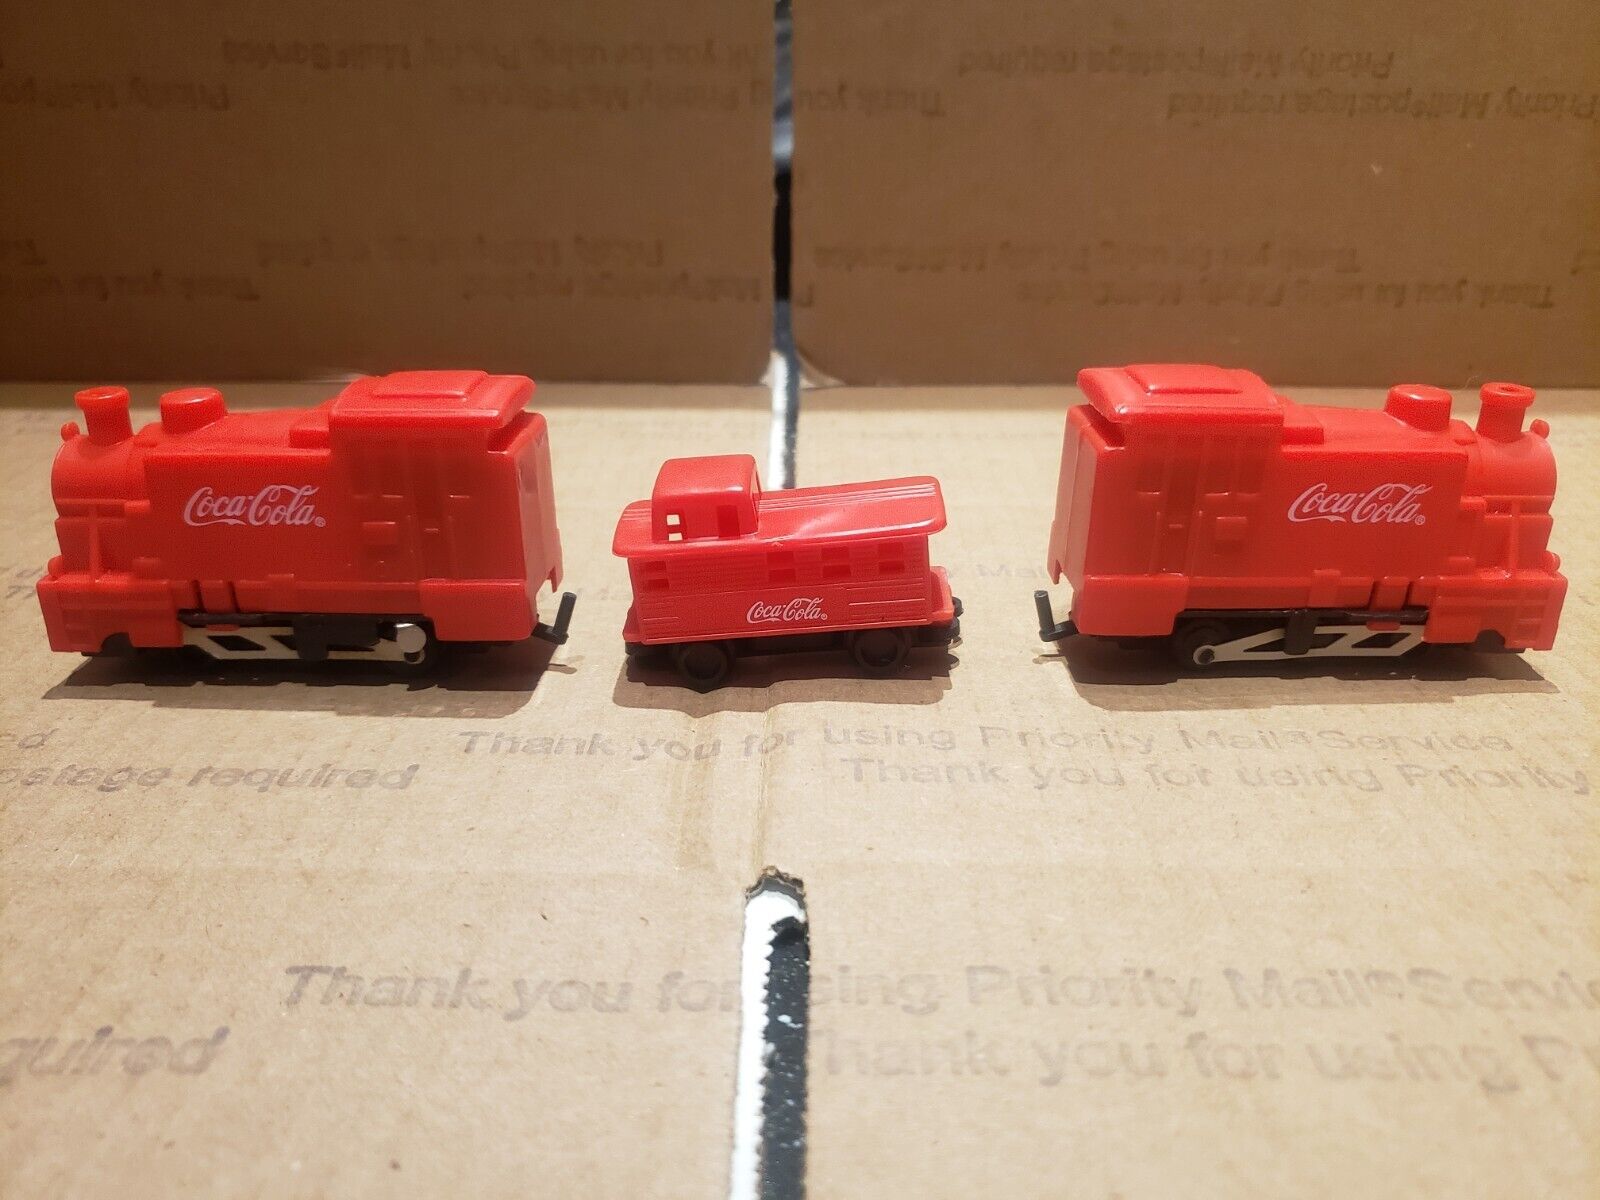 Coca Cola Red Toy Trains Set 3 Plastic Engine Passenger Collectible Advertising